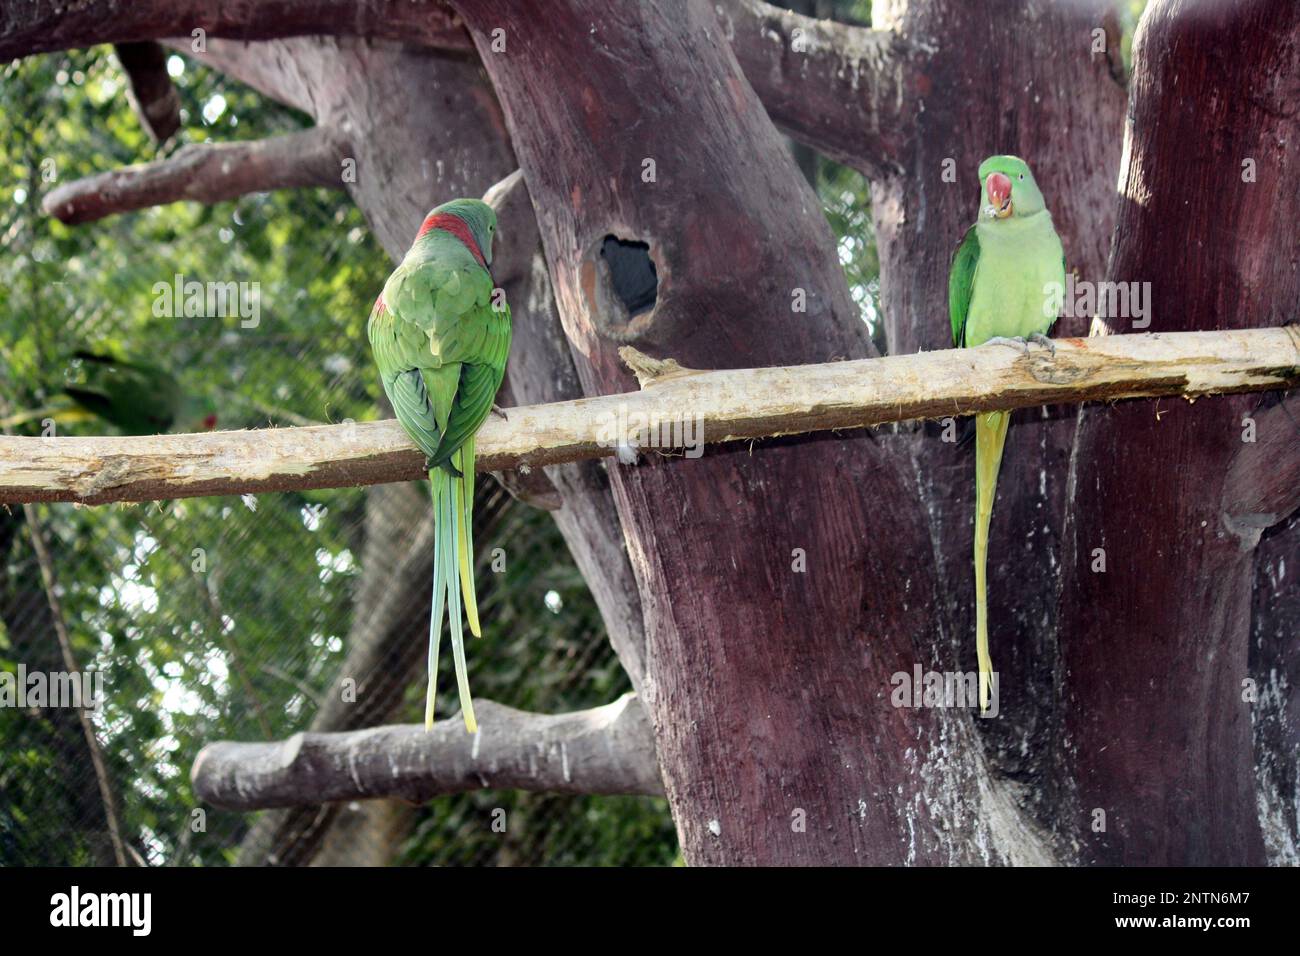 Two Alexandrine parakeets (Psittacula eupatria) perched on a wooden pole in a zoo : (pix Sanjiv Shukla) Stock Photo